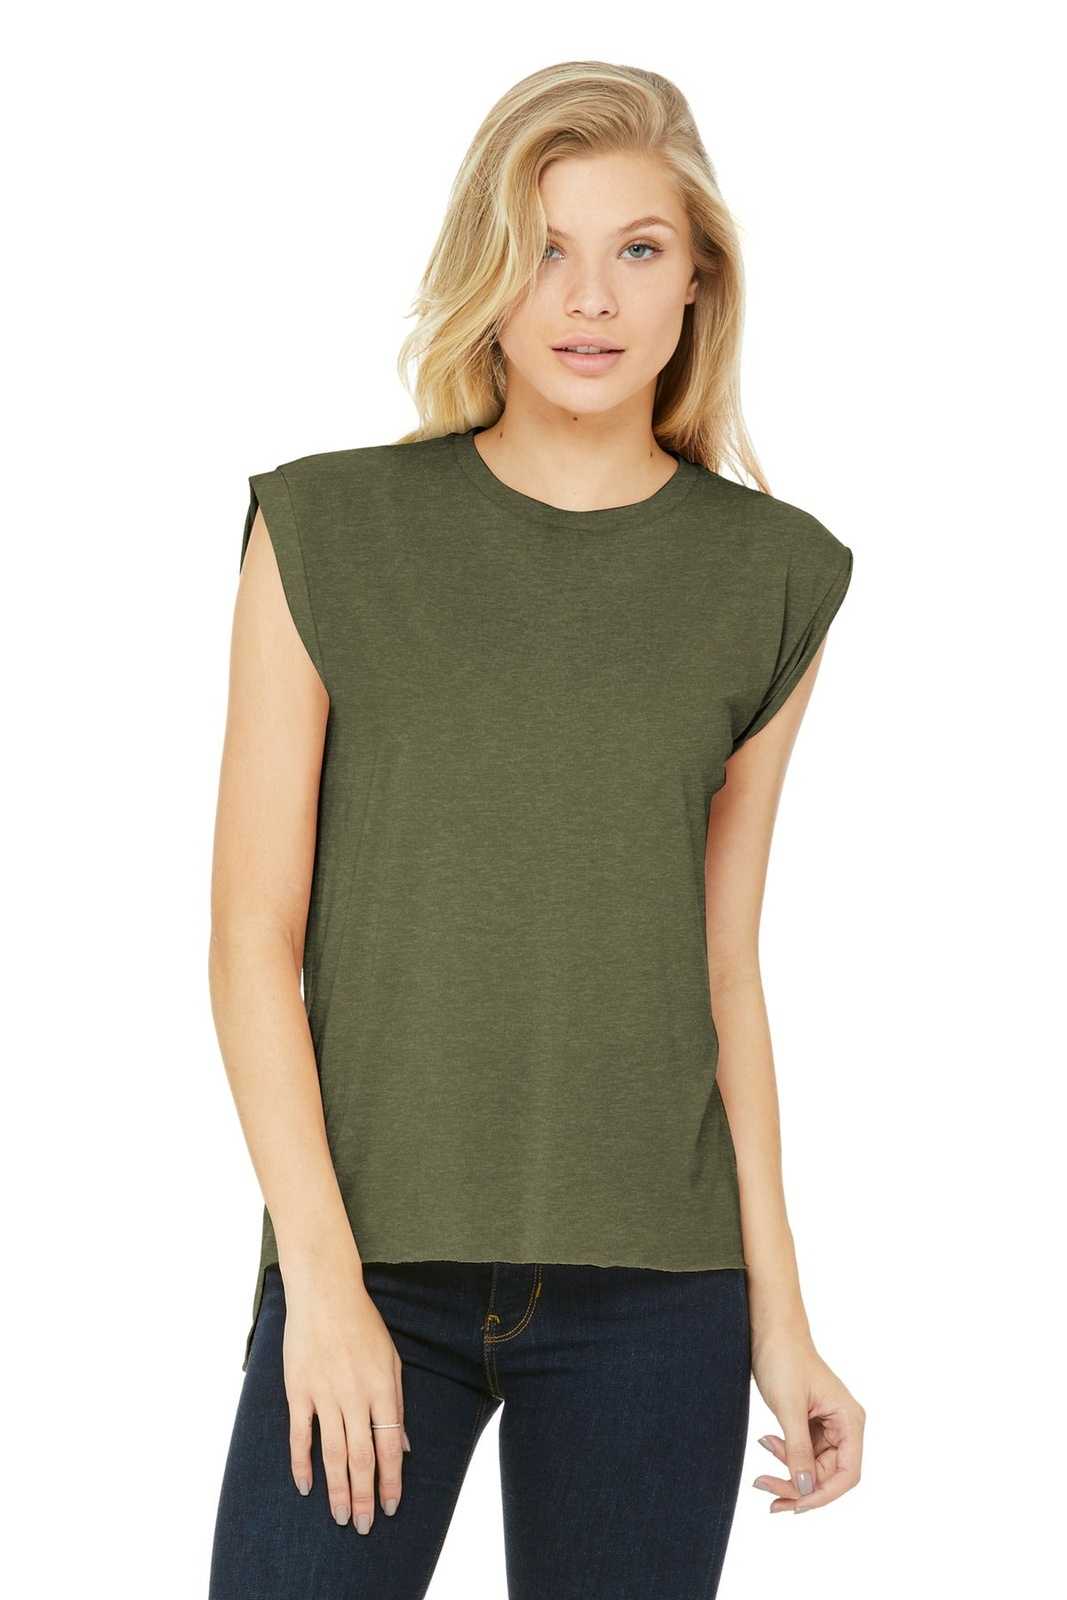 Bella + Canvas 8804 Women's Flowy Muscle Tee with Rolled Cuffs - Heather Olive - HIT a Double